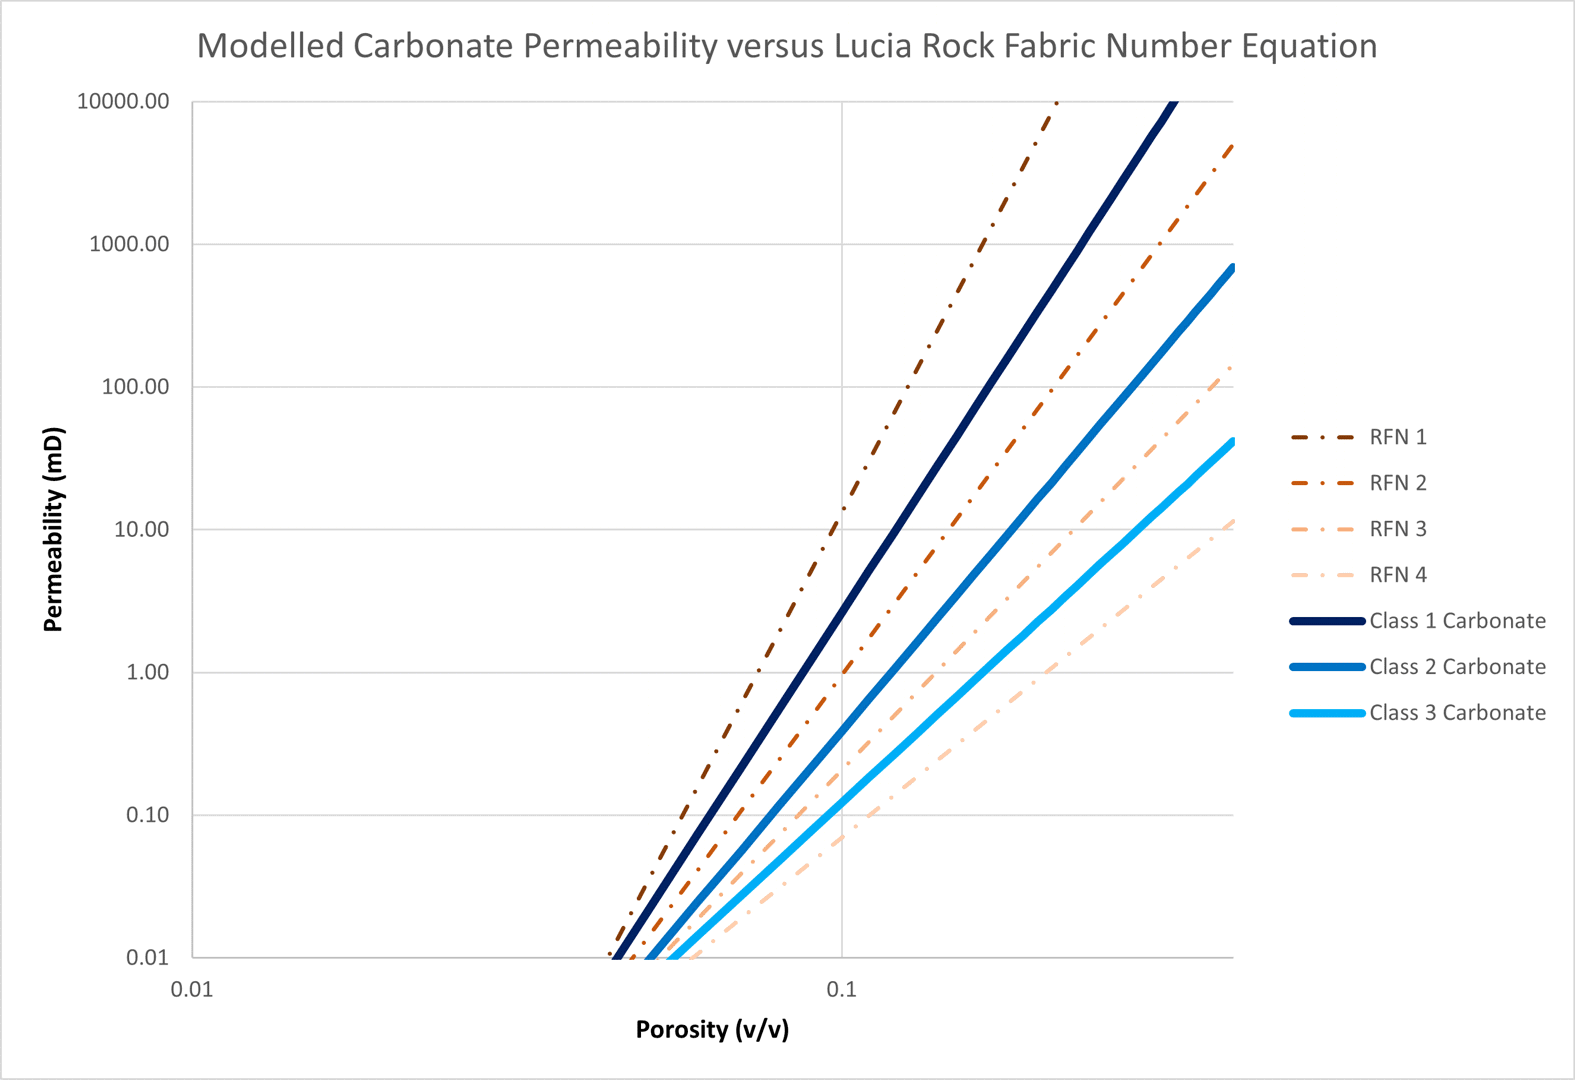 Match of modelled permeability equation against Lucia rock fabric number equation.